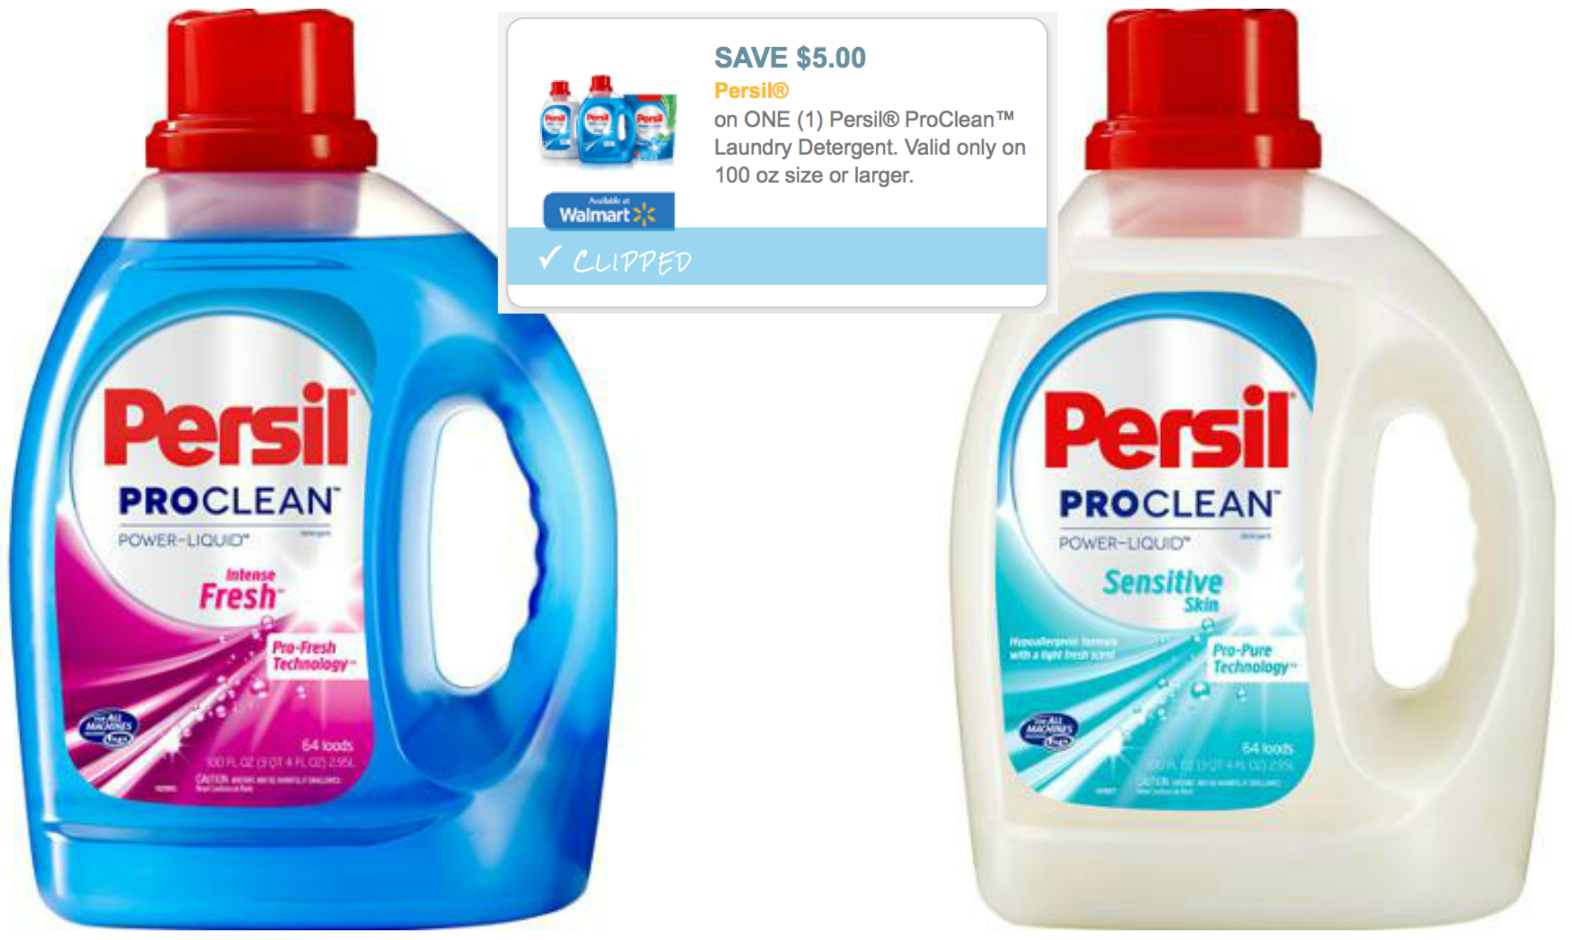 High Value 5 1 Persil Proclean Laundry Detergent 100oz Coupon Only 6 97 At Walmart 7 Per Ounce Hip2save